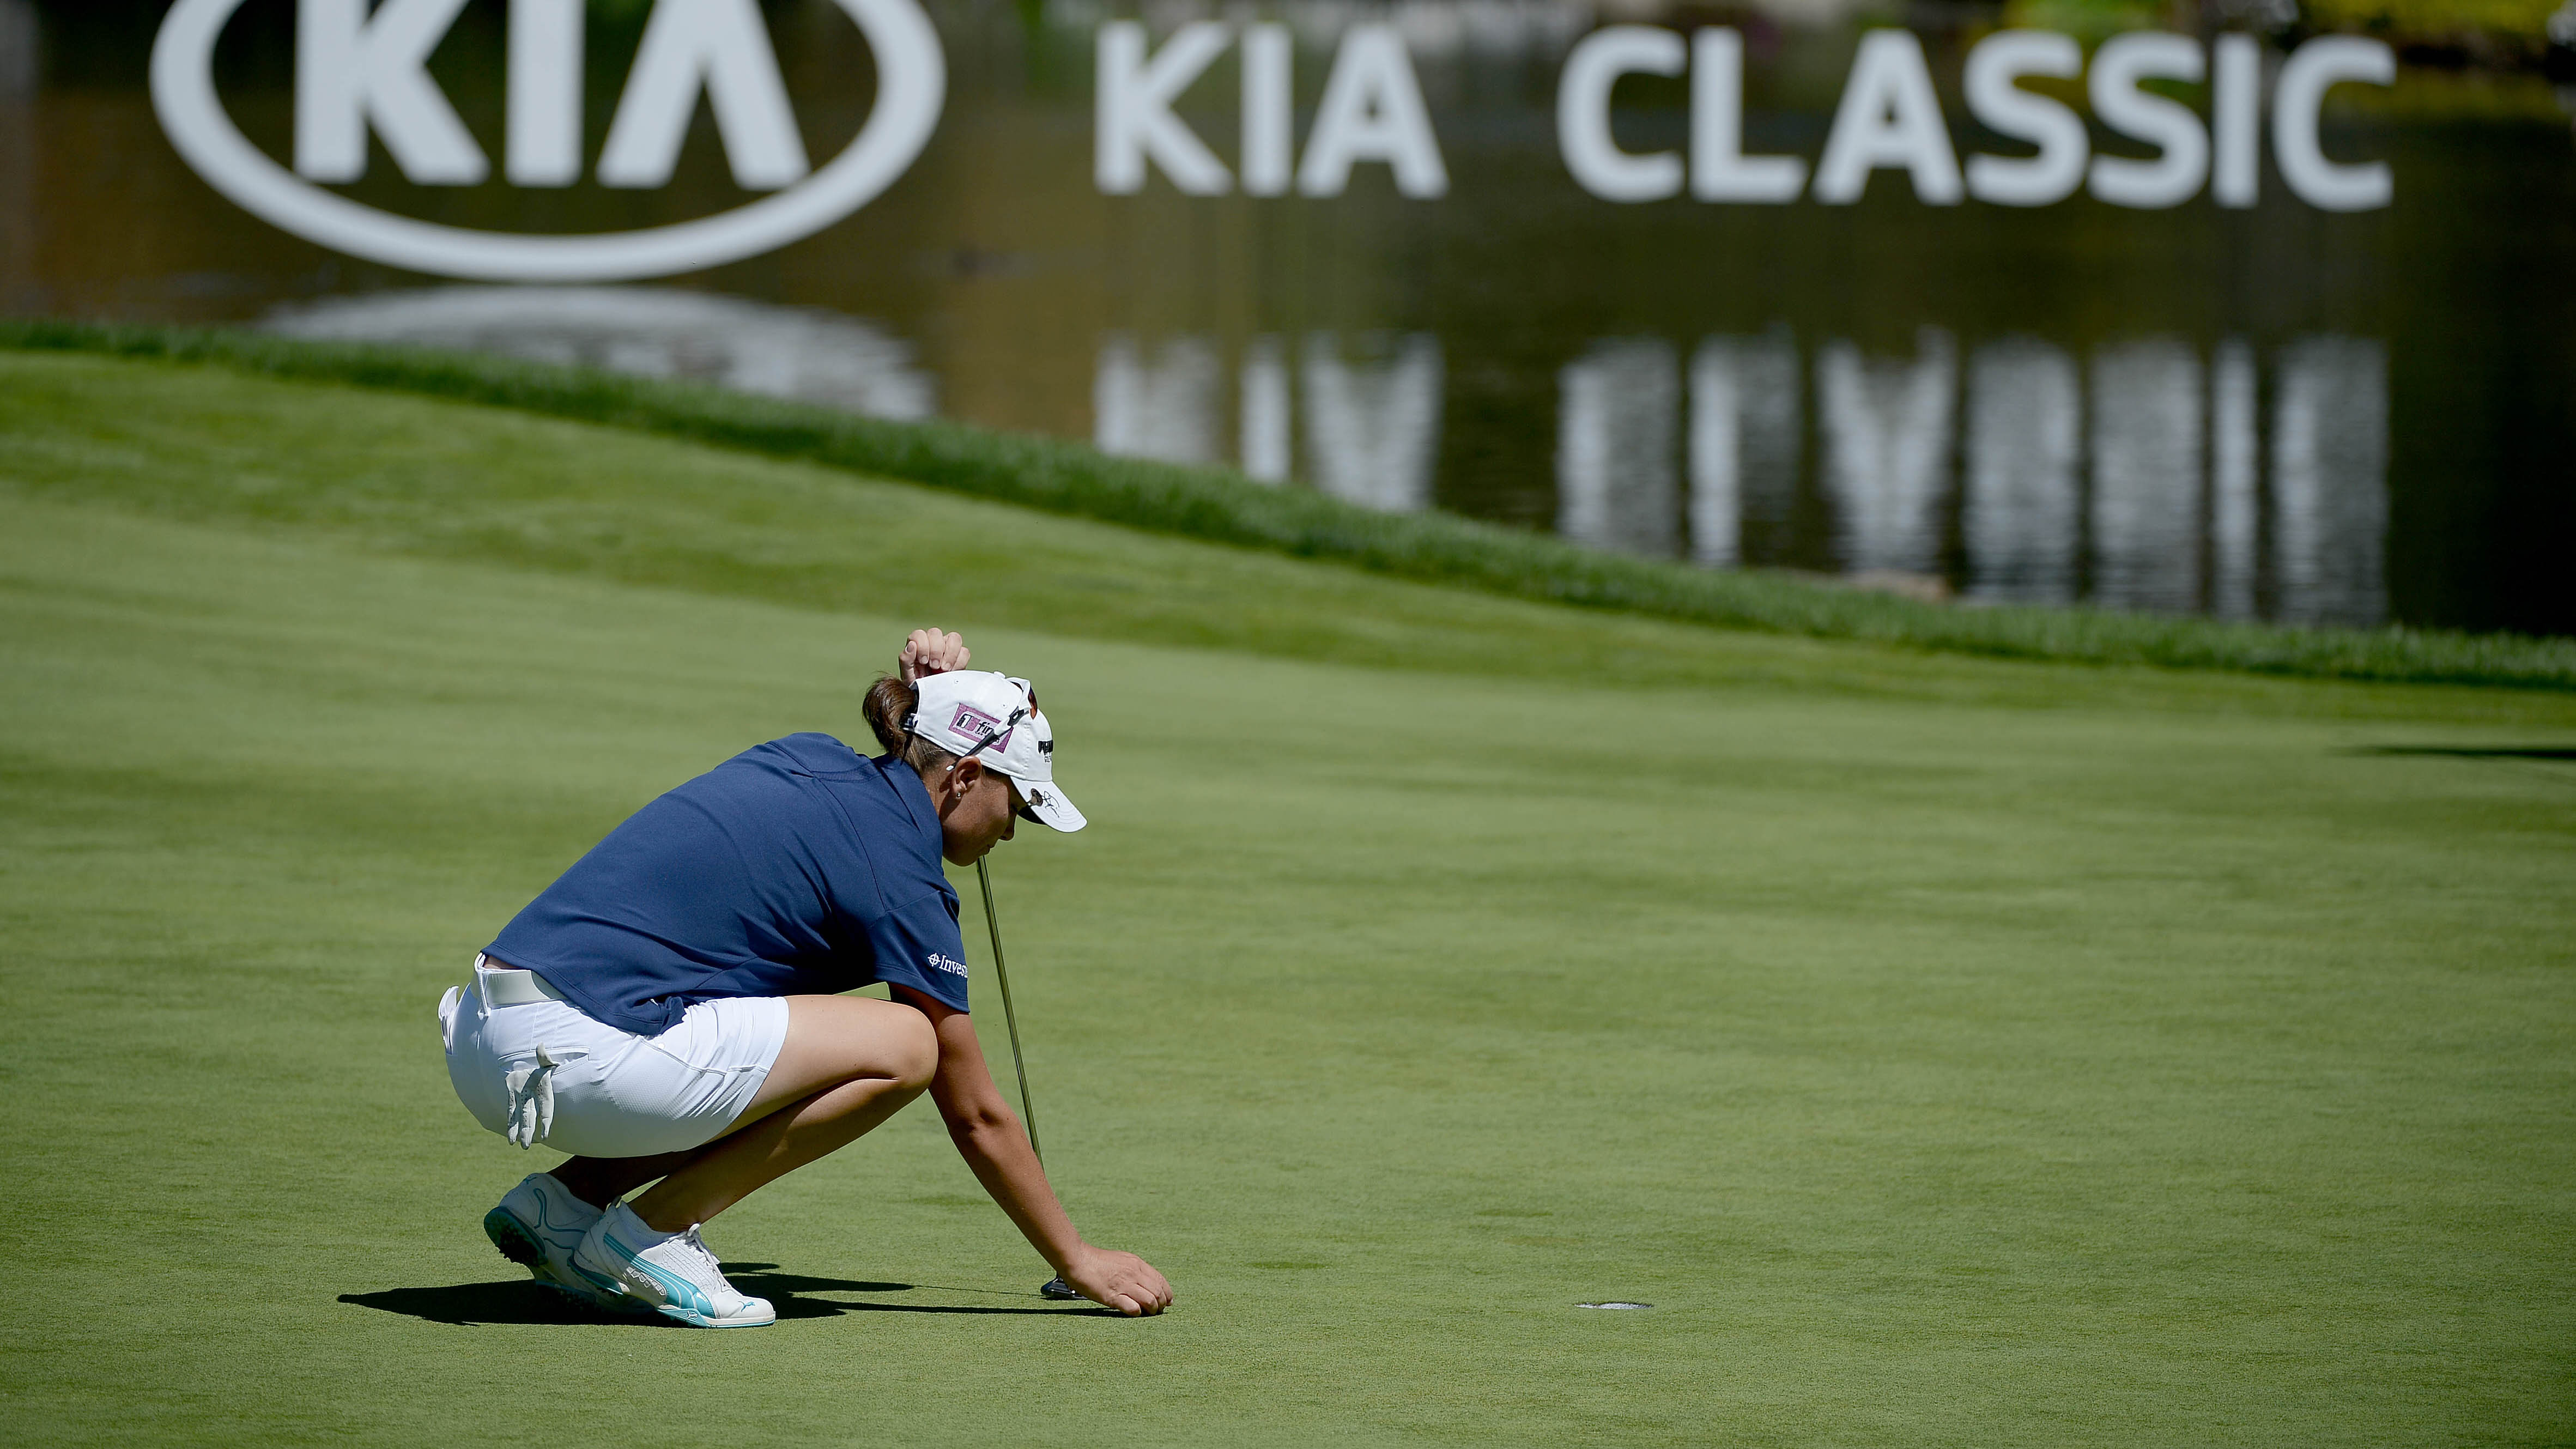 Lee-Anne Pace of South Africa lines up her putt on the 16th hole during Round One of the LPGA KIA Classic at the Aviara Golf Club on March 26, 2015 in Carlsbad, California